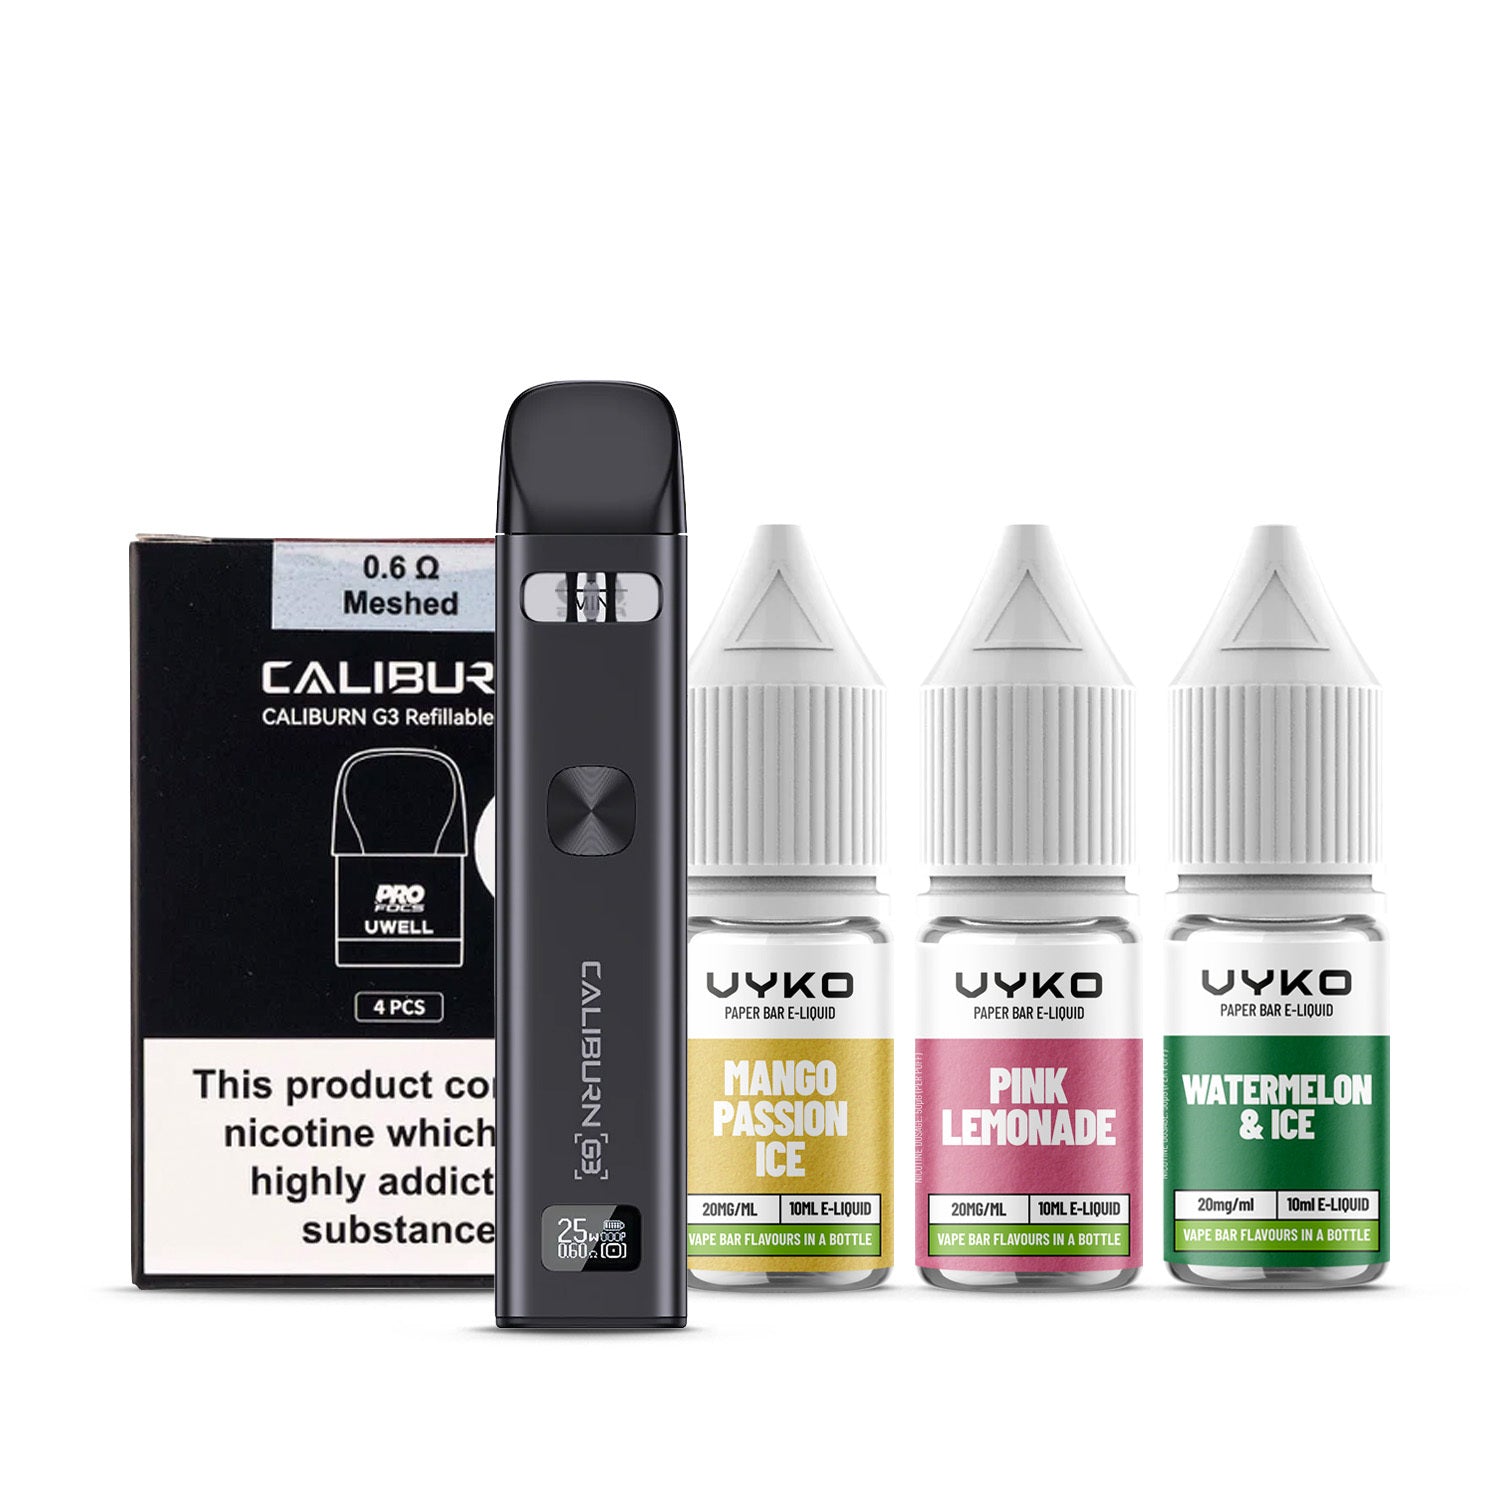 Grey Uwell Caliburn G3 Kit with a pack of pods and three e-liquids